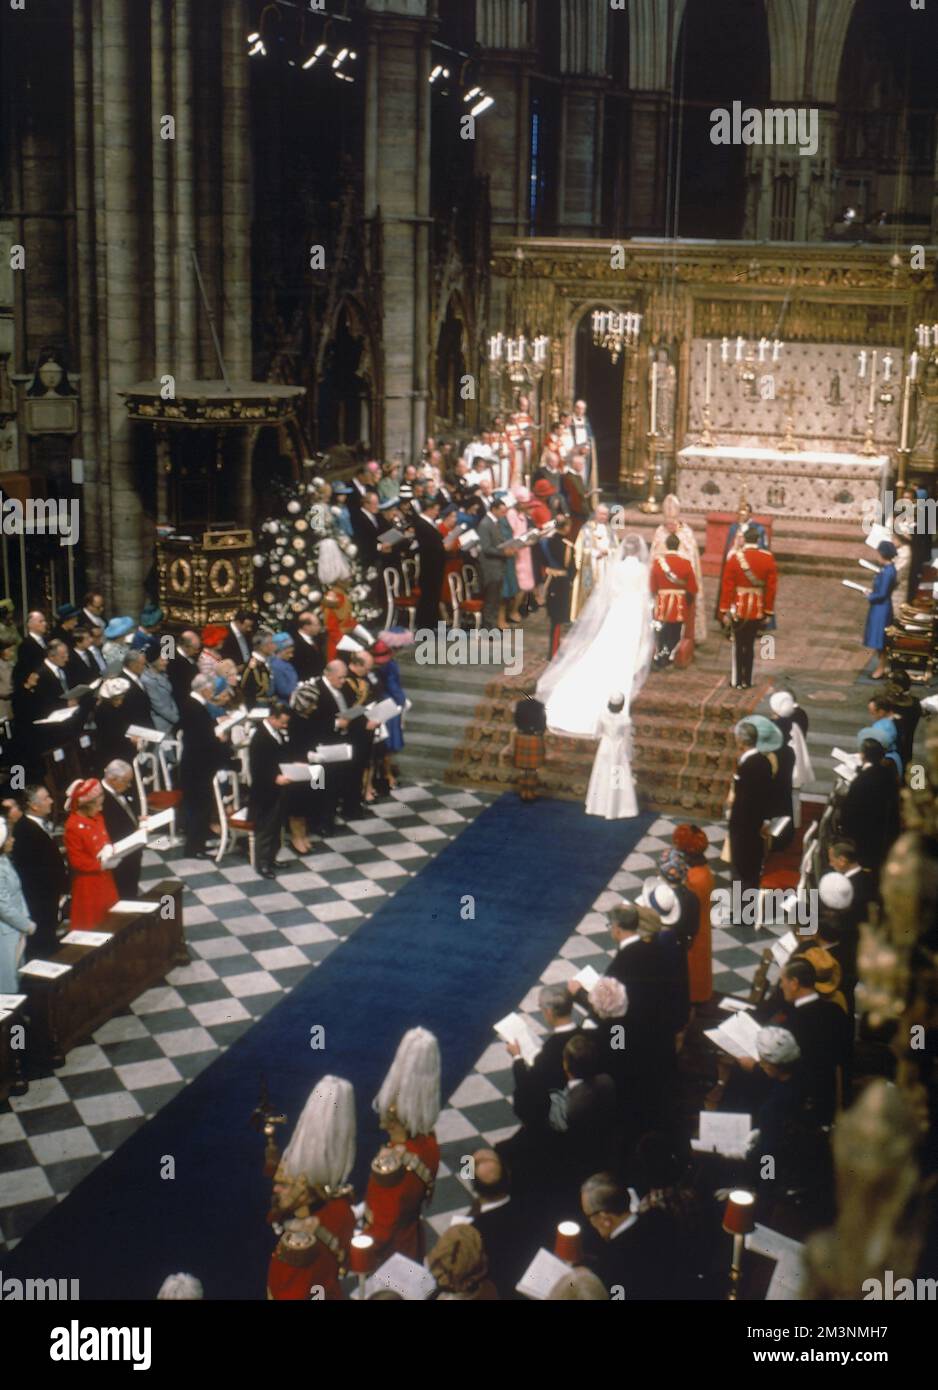 The Marriage of Princess Anne to Mark Phillips, a Lieutenant in the 1st Queen's Dragoon Guards, at Westminster Abbey on 14th November 1973.     Date: 1973 Stock Photo